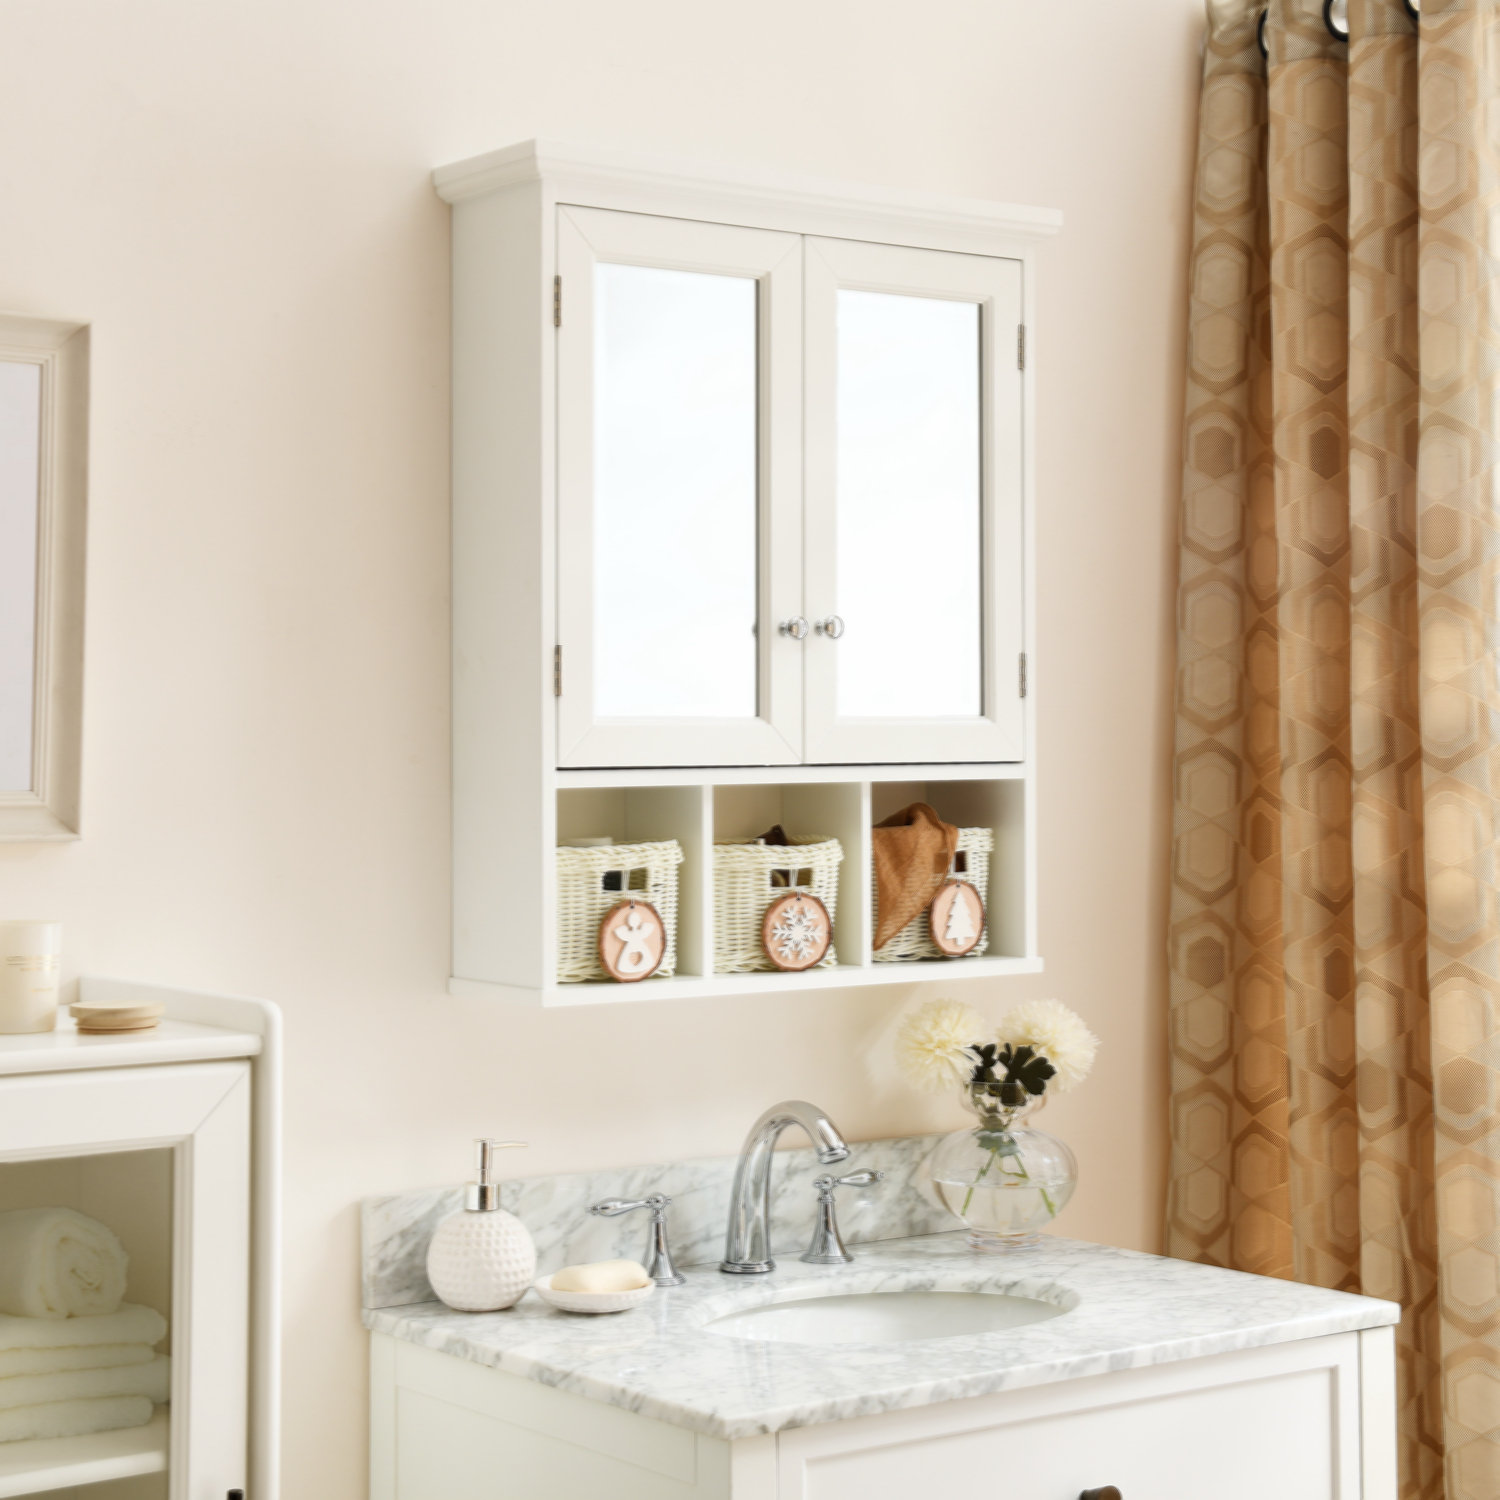 Dorset 27W 29H Wall Mounted Bathroom Cabinet With 2 Glass Cabinet Doors  And 1 Open Shelf